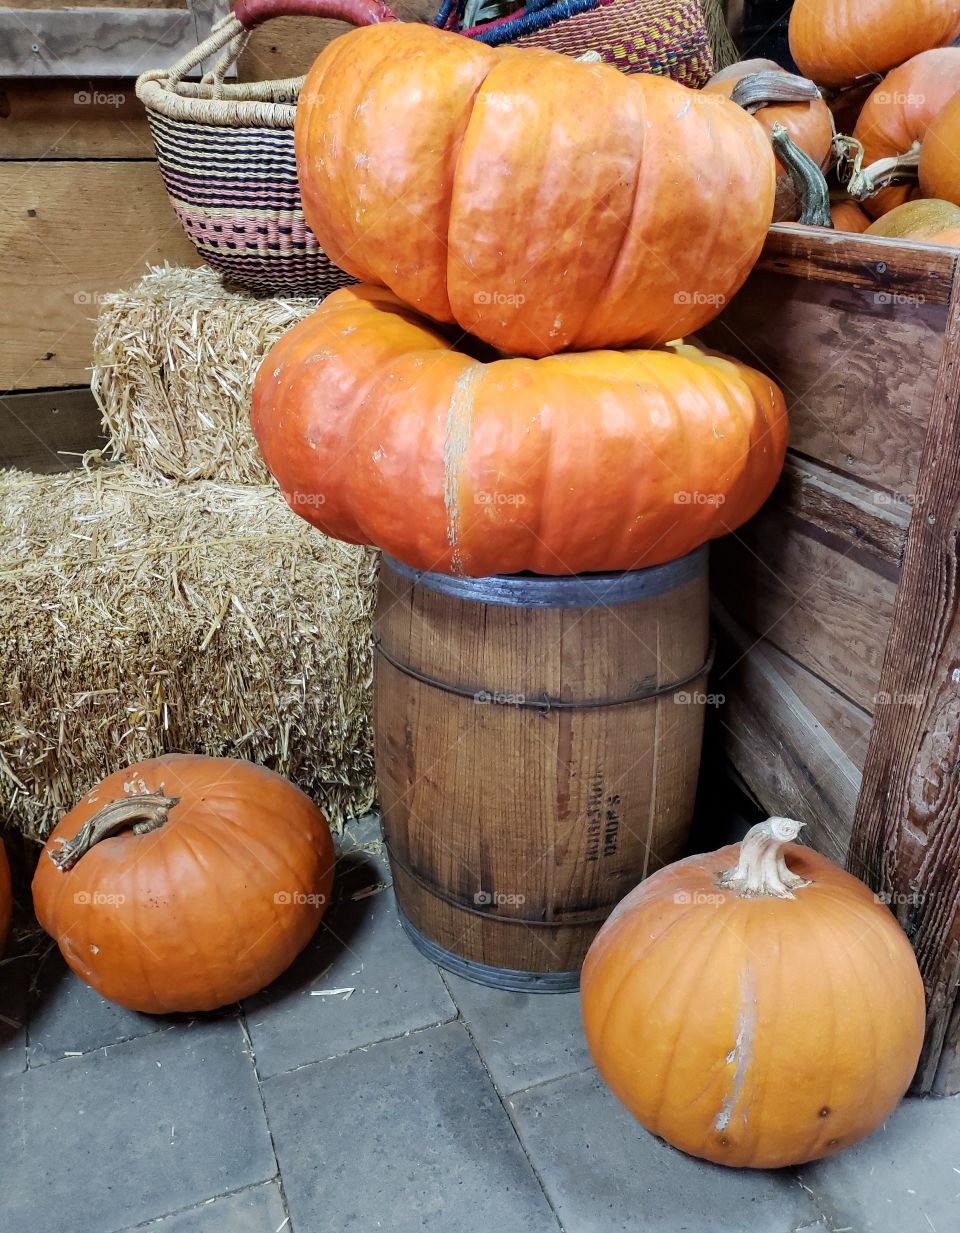 Two large flat orange pumpkins stacked on a wooden barrel with hay bales and woven baskets for a nice holiday display.